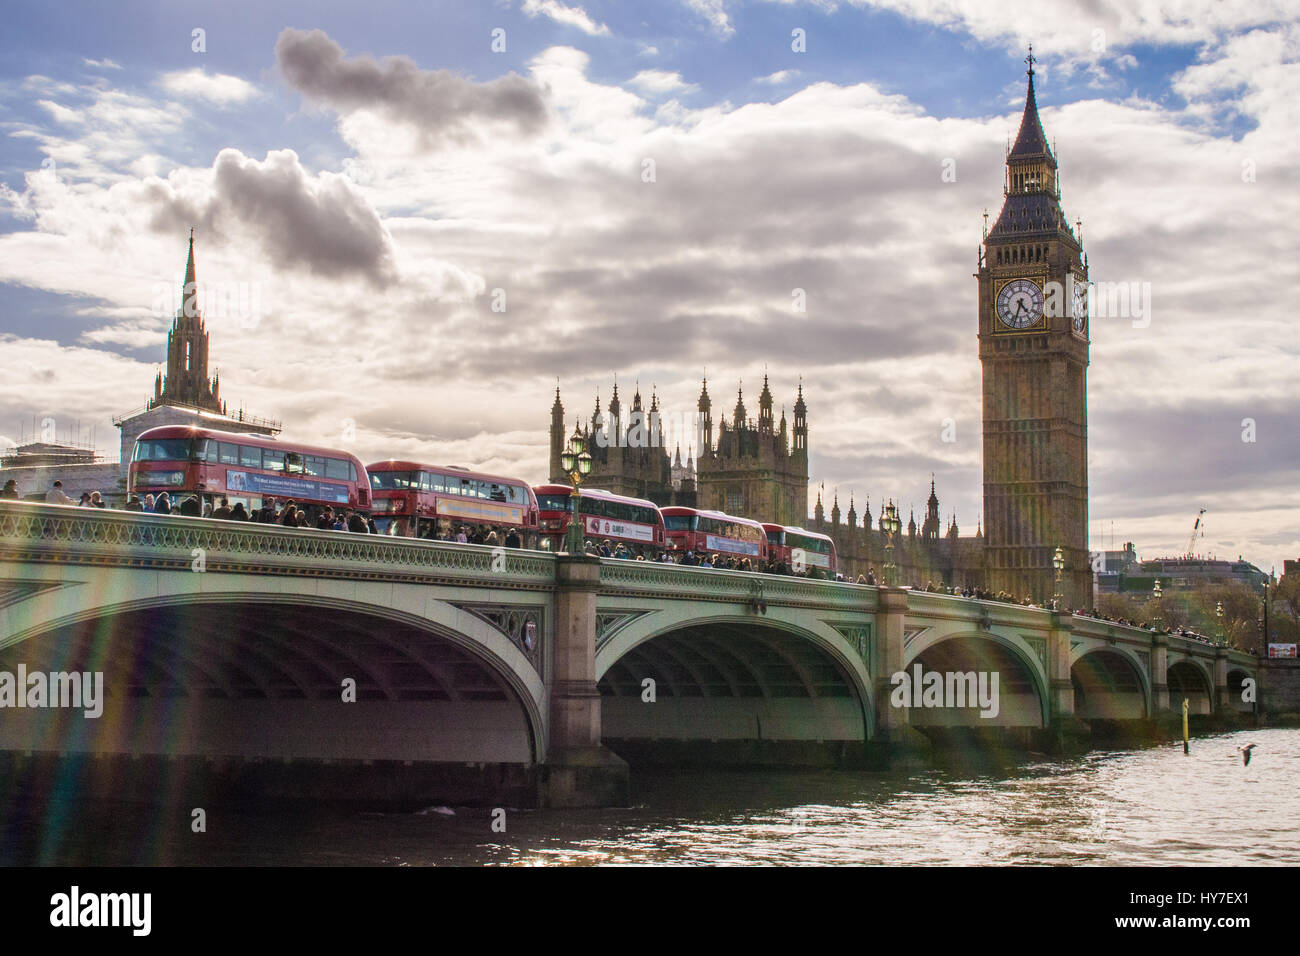 Buses on Westminster Bridge with Elizabeth Tower behind (Which houses Big Ben), London, England. Stock Photo